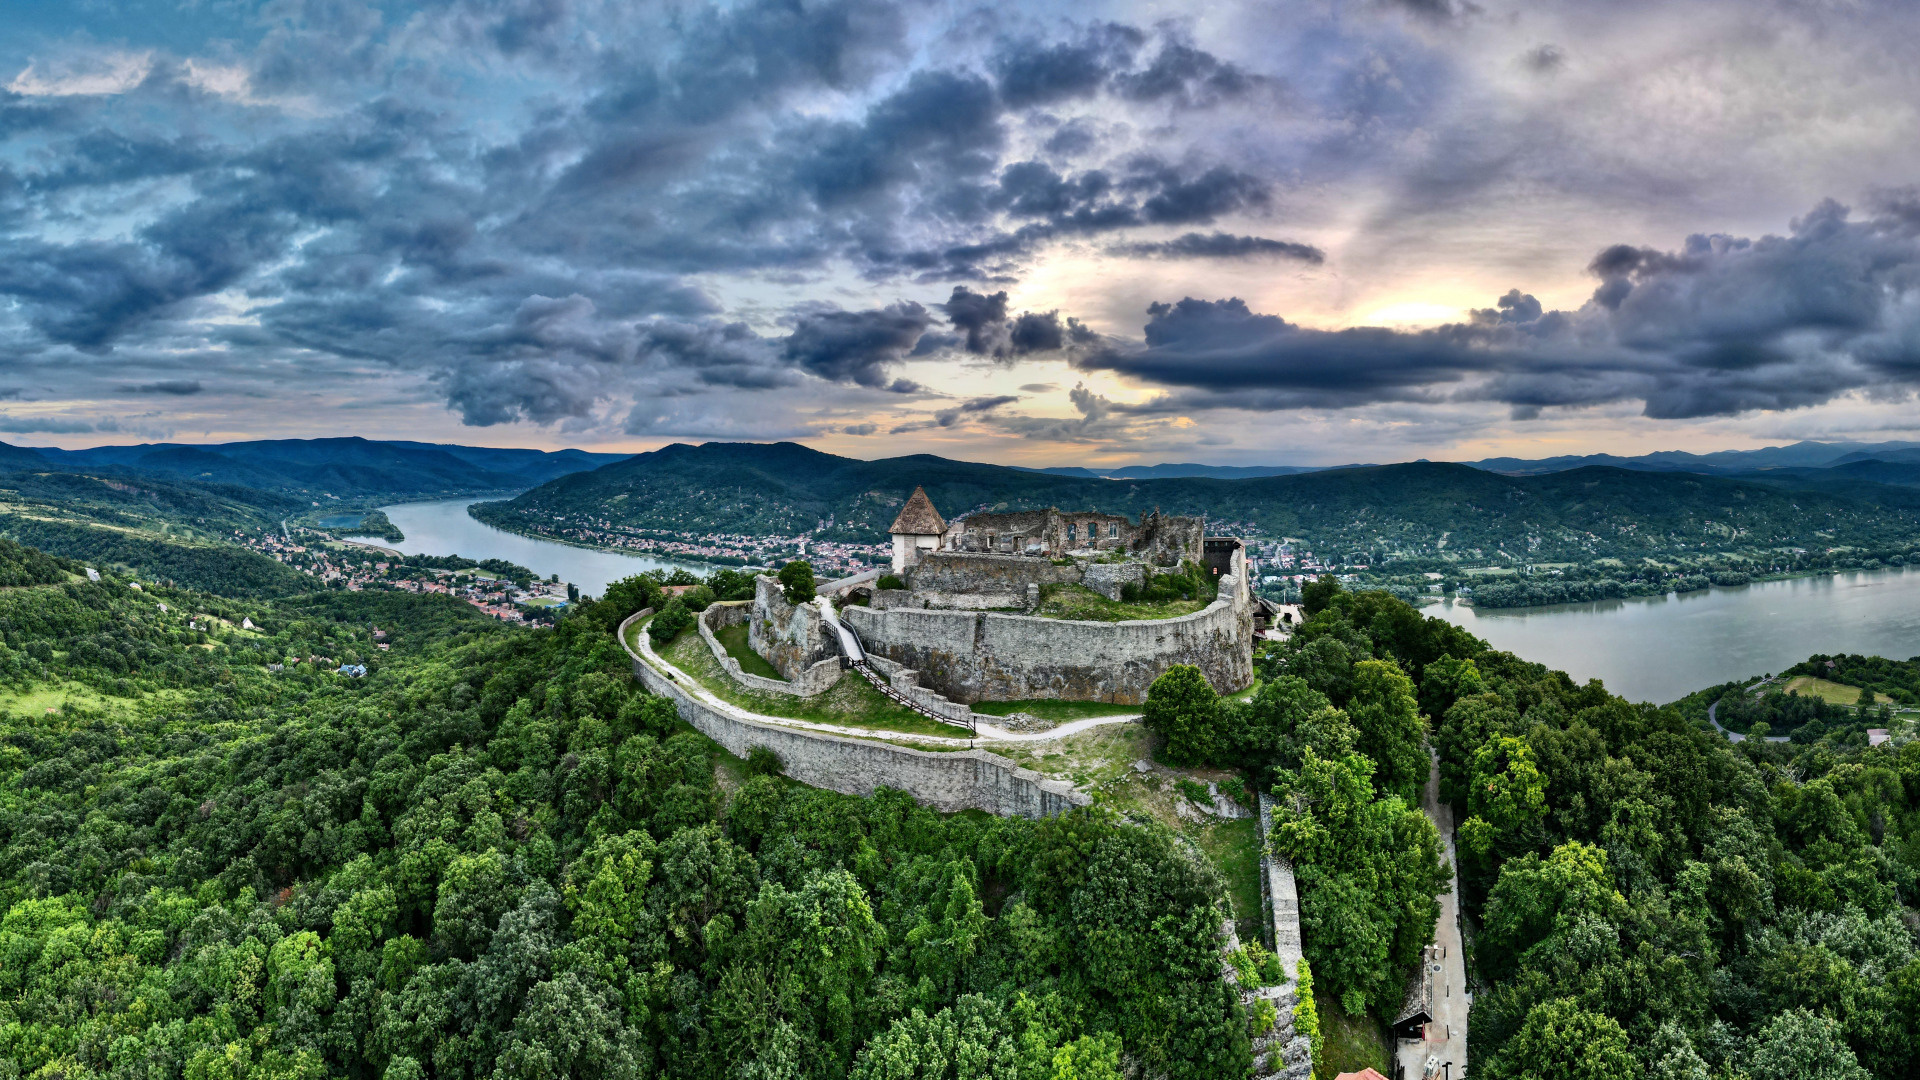 Hungary: Visegrad Castle, Pest County, The Danube Bend, Scenery. 1920x1080 Full HD Background.